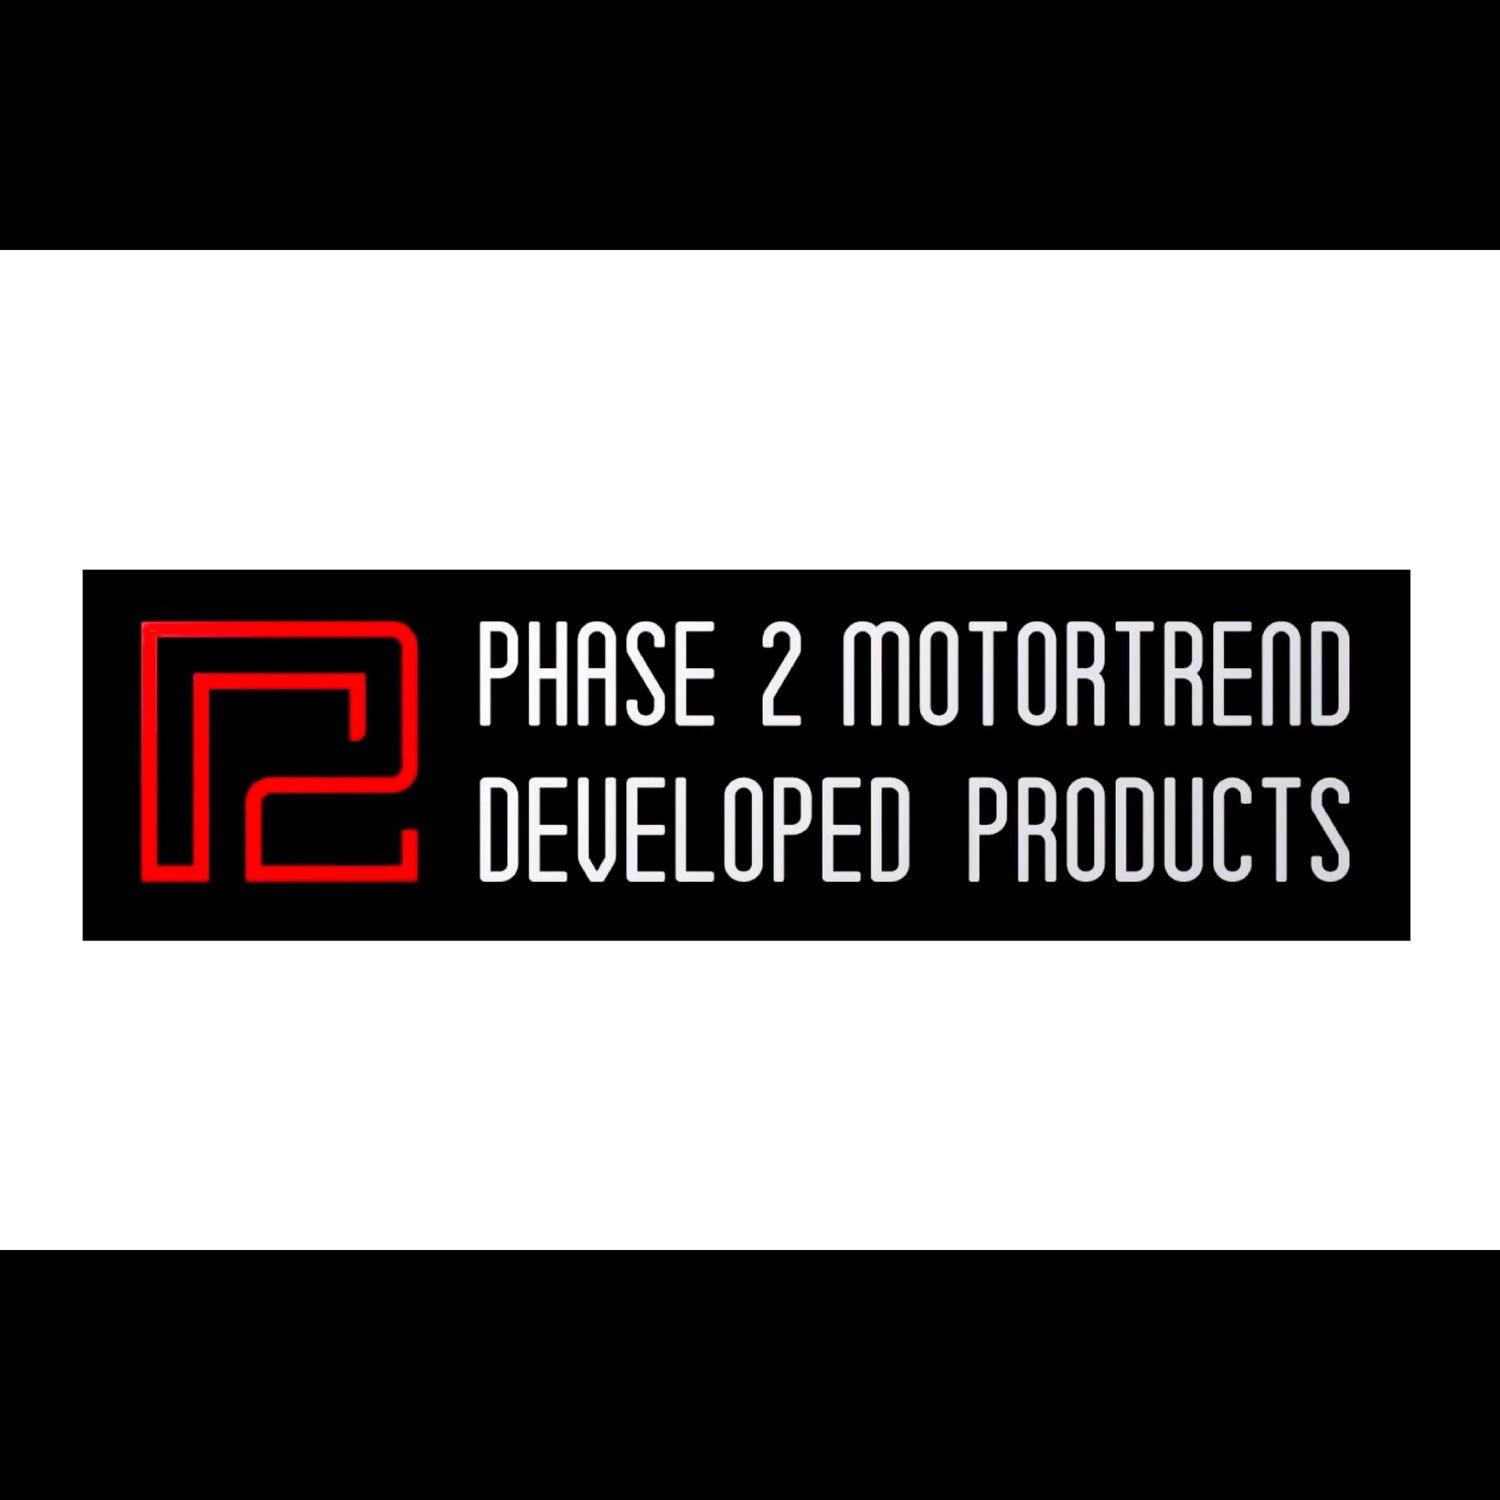 Phase 2 Motortrend logo with a white background